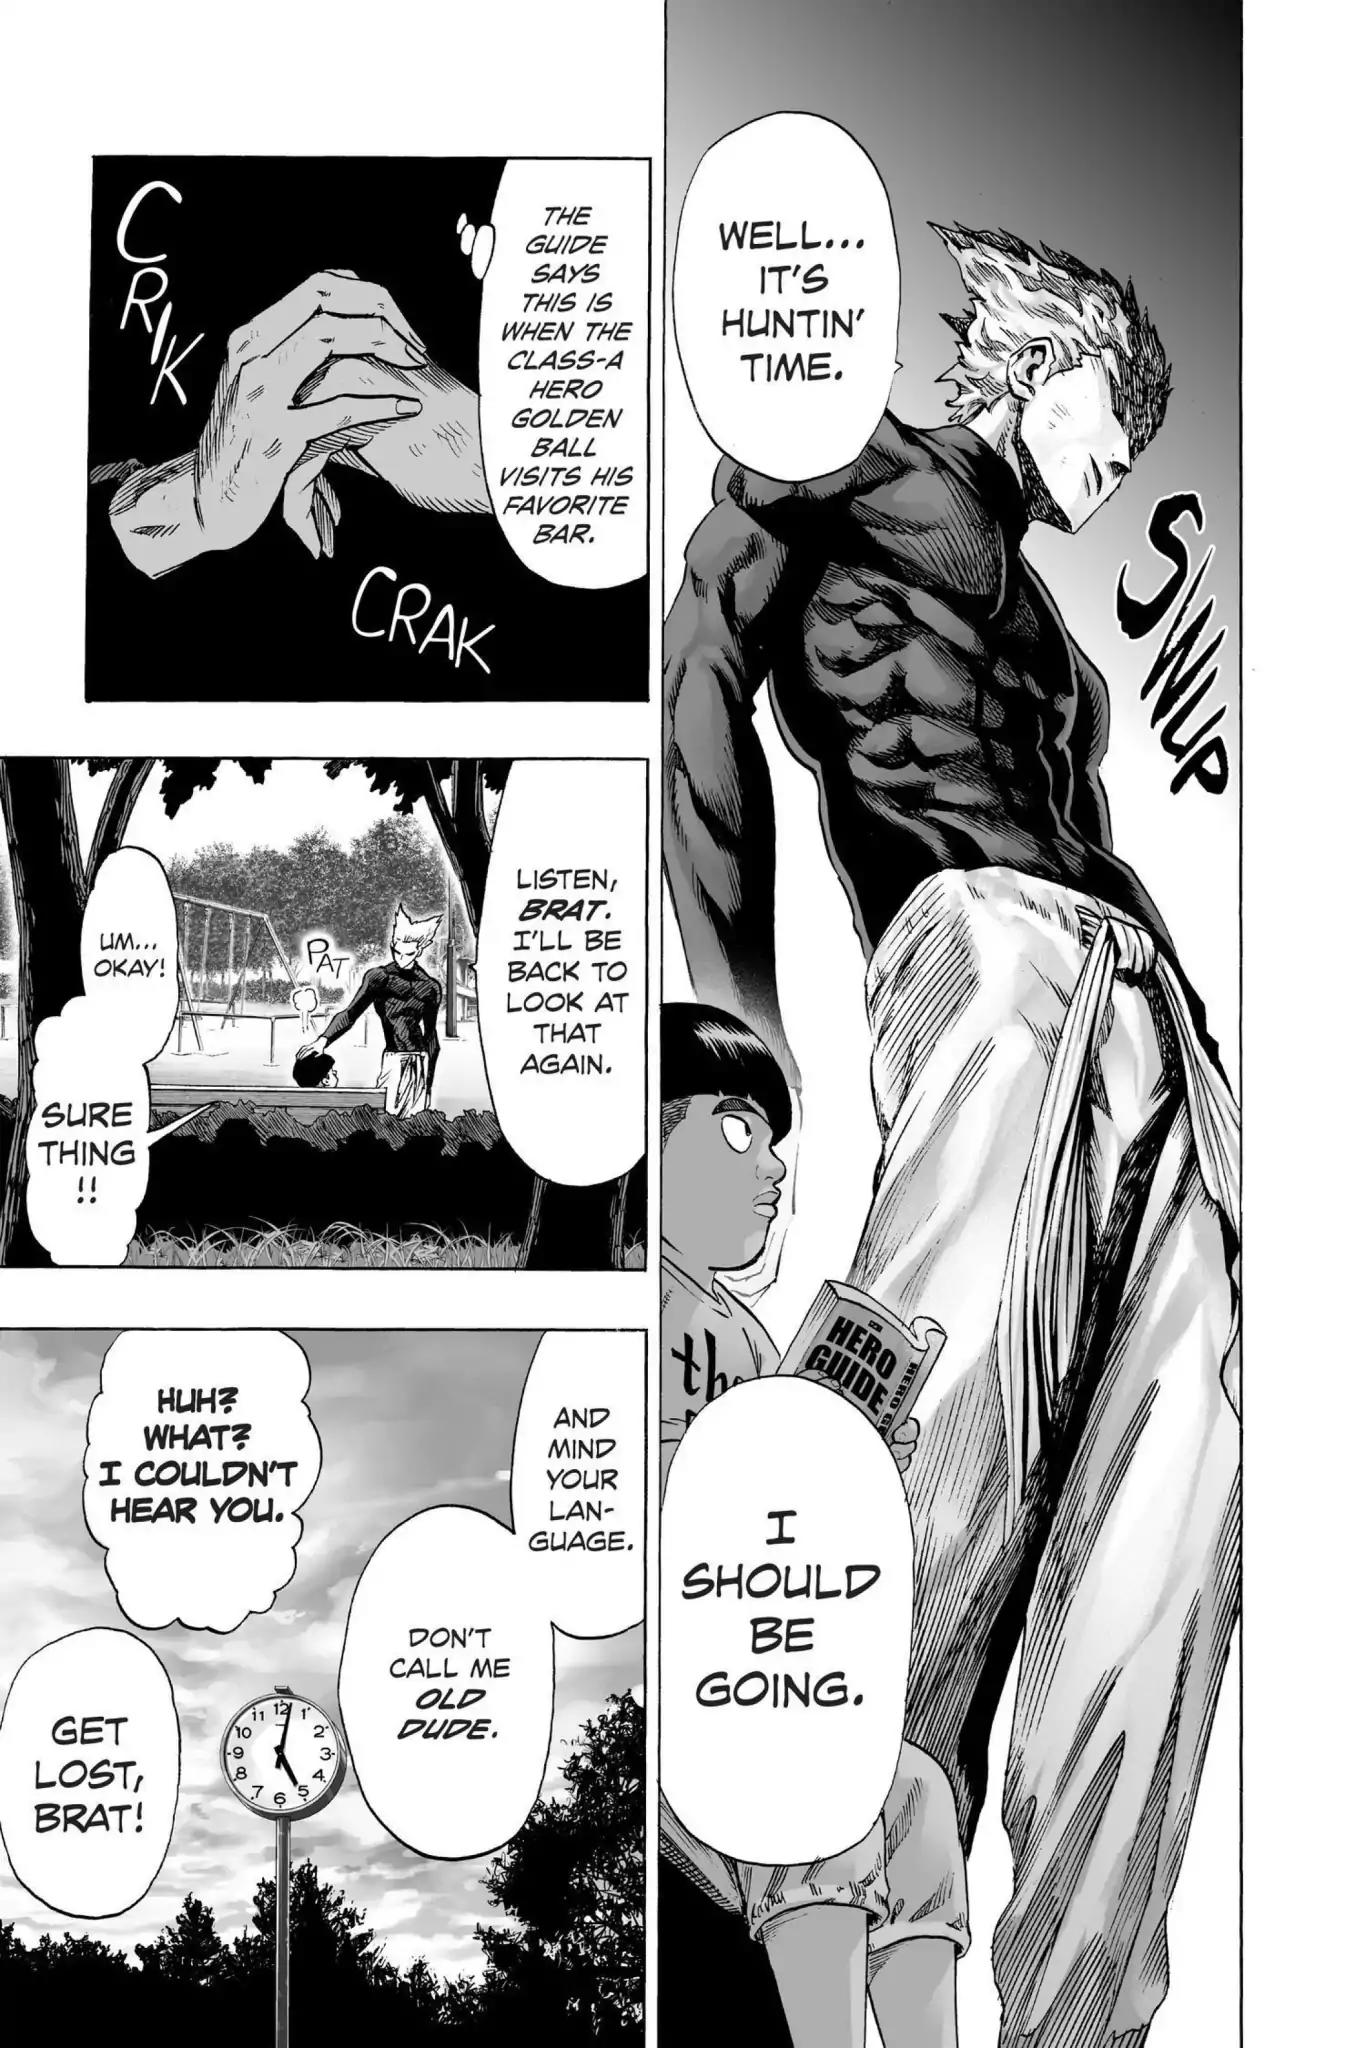 One Punch Man, Chapter 49 I